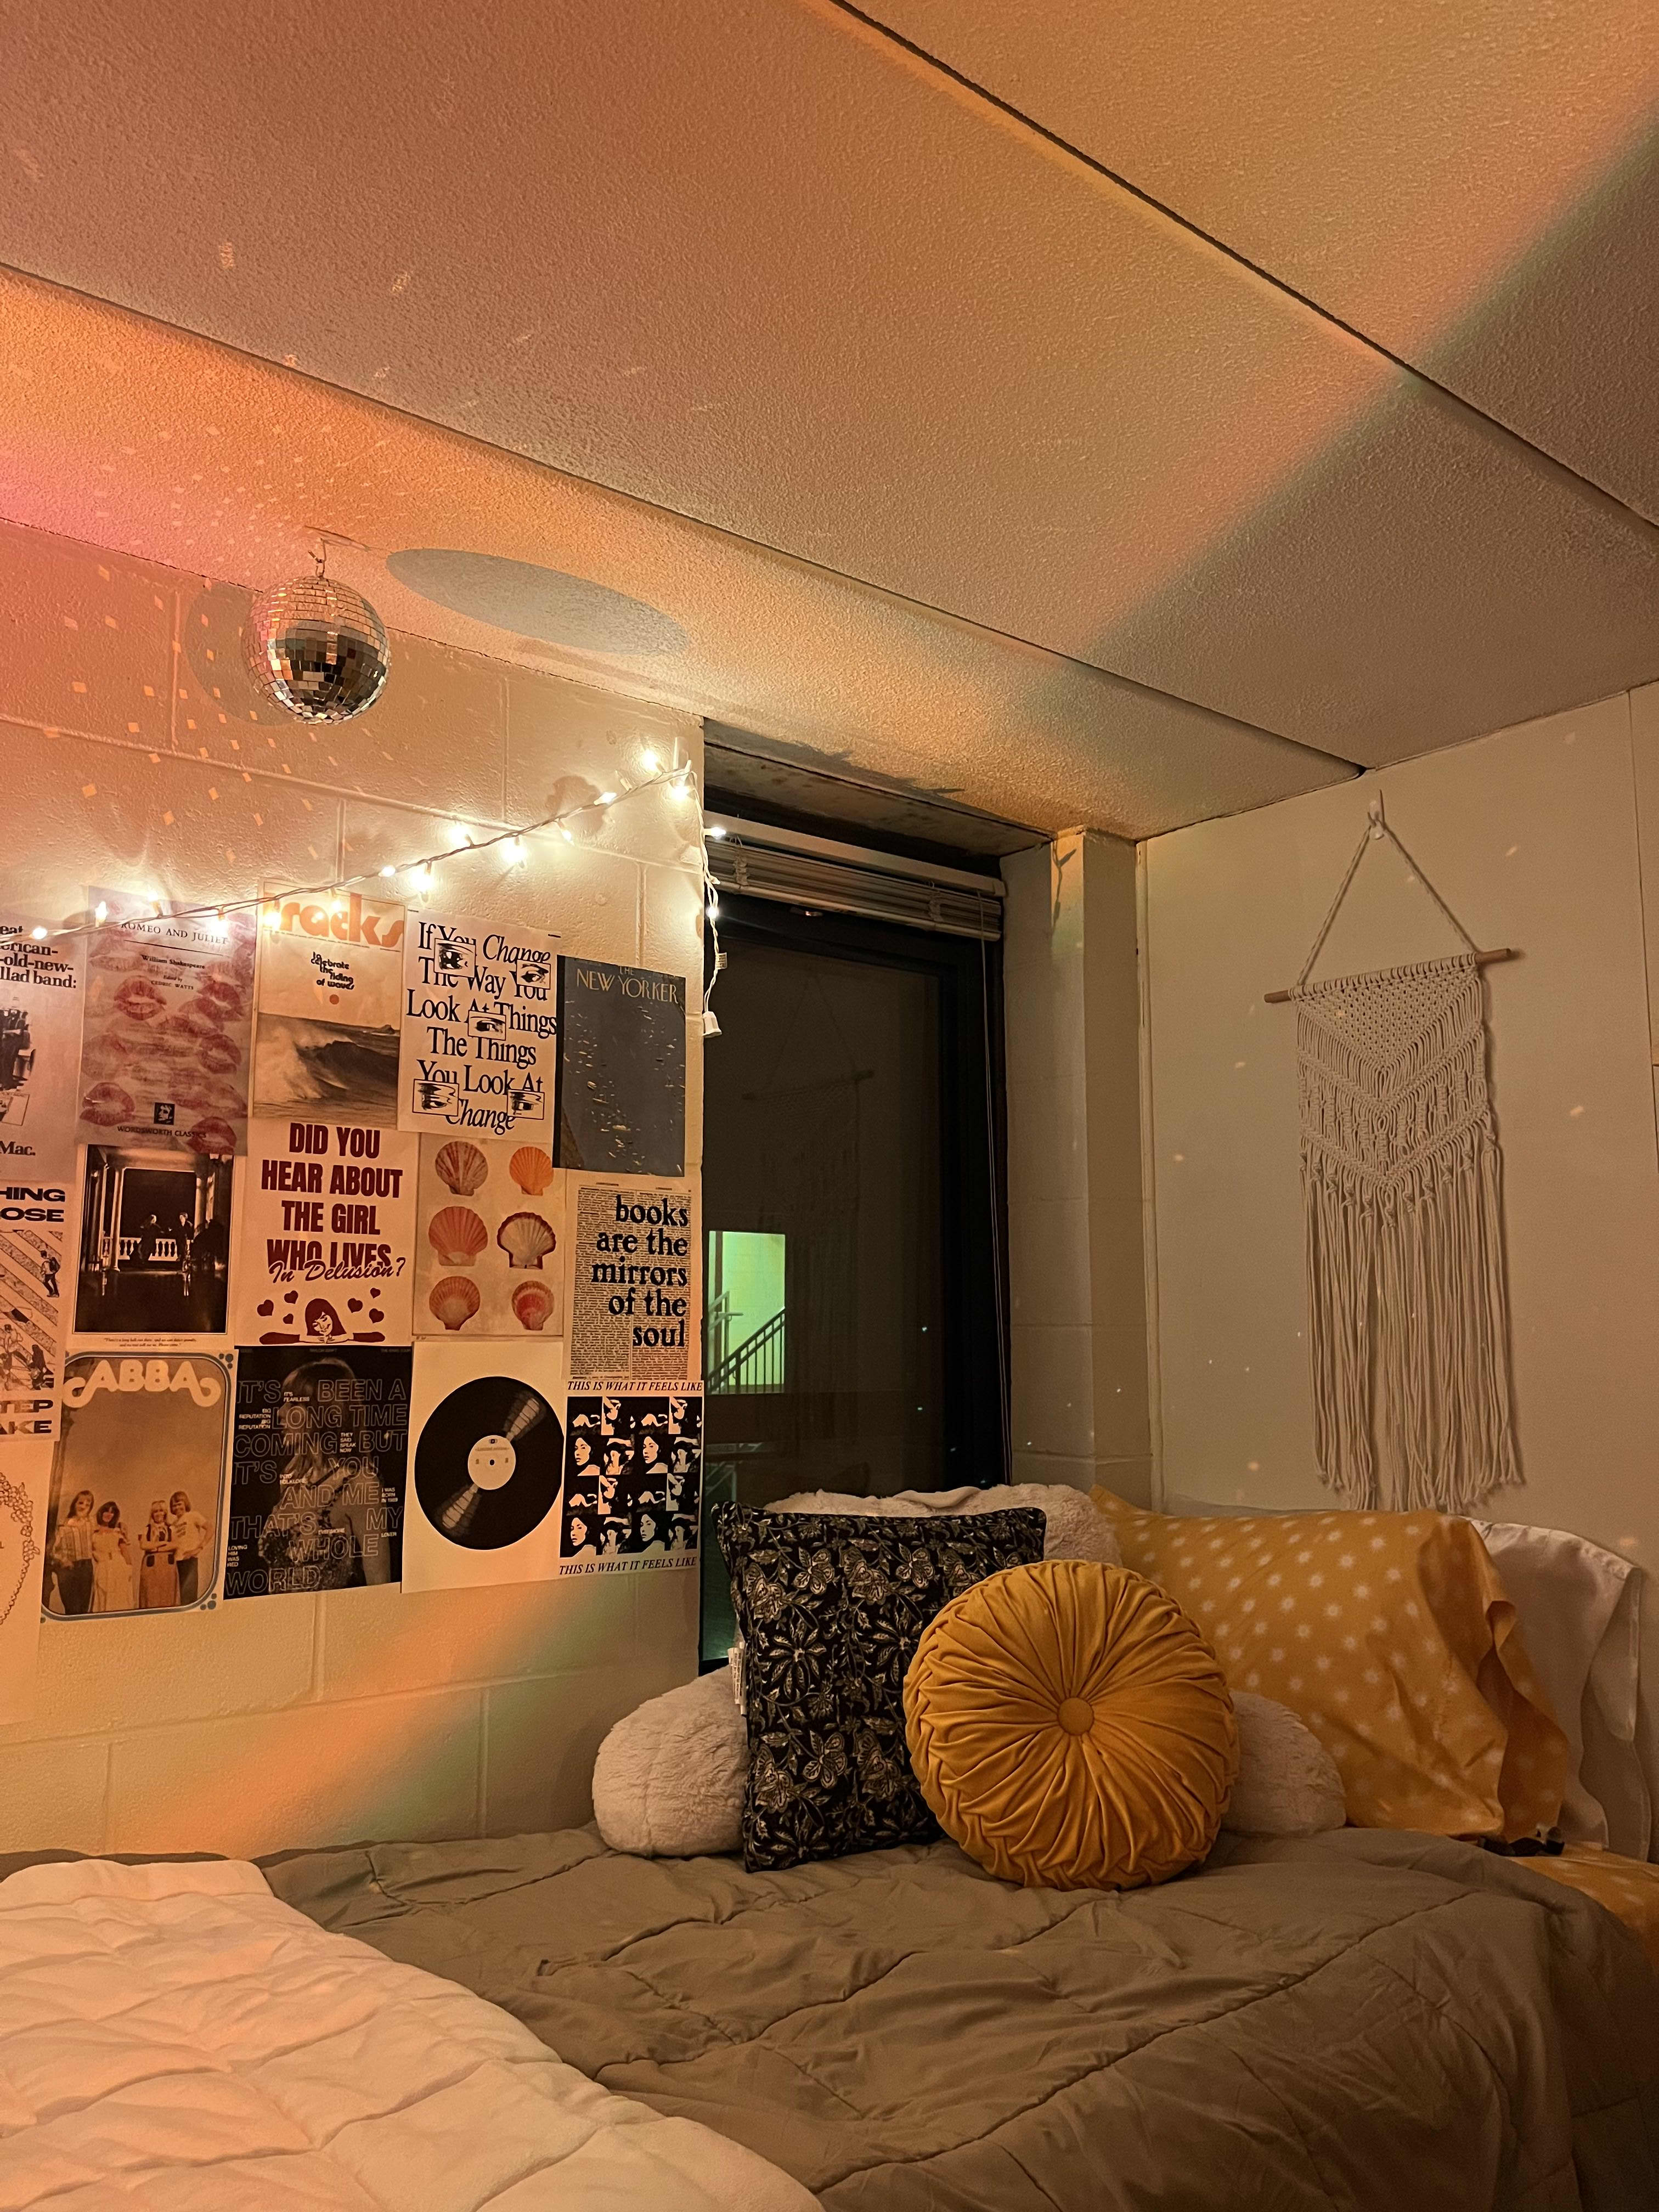 taylor swift decorated rooms - Google Search